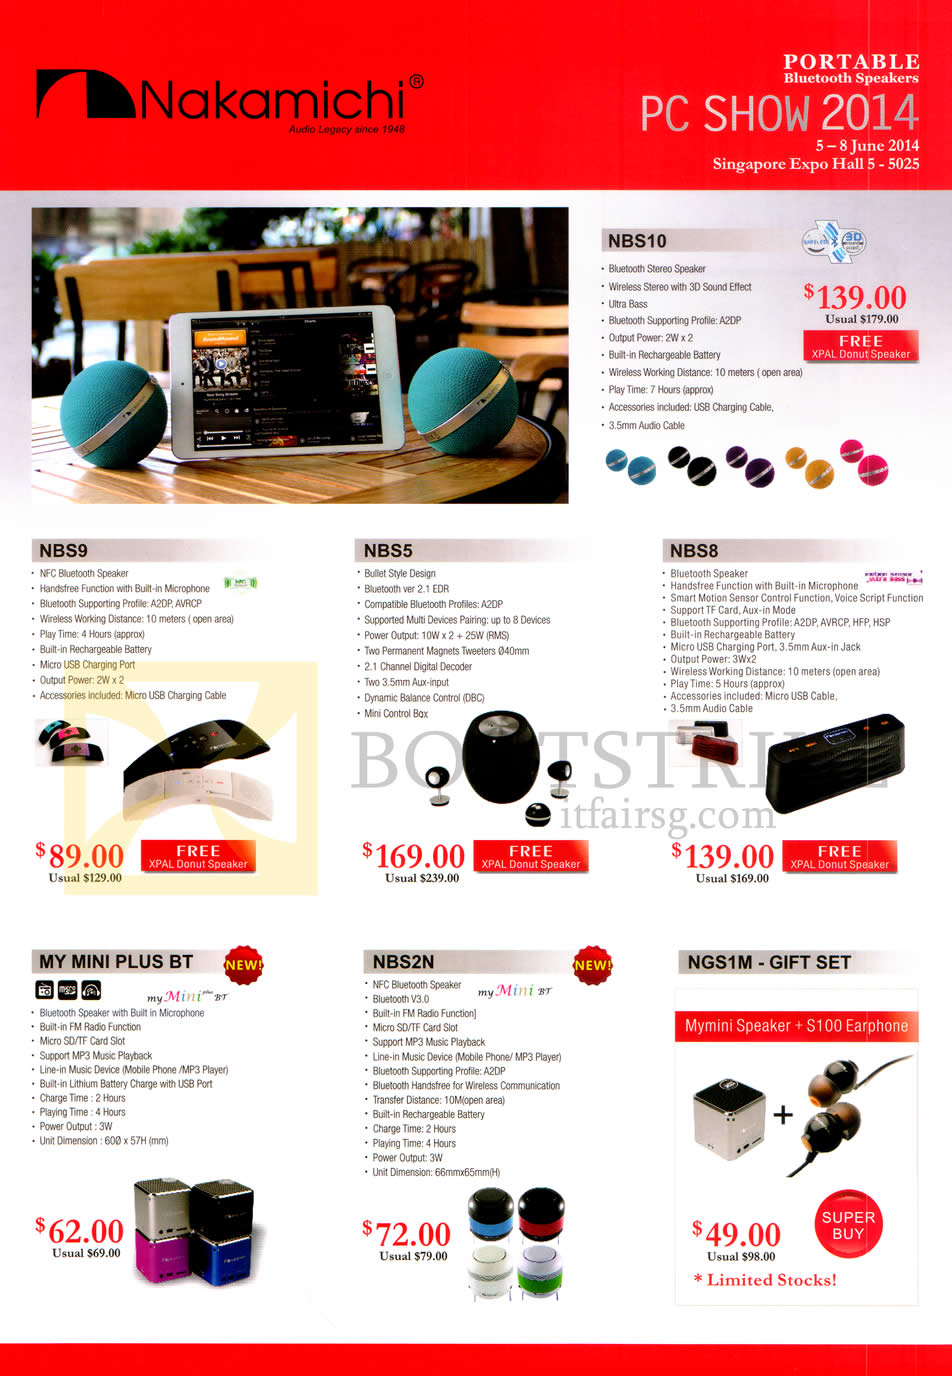 PC SHOW 2014 price list image brochure of Sprint-Cass Nakamichi Bluetooth Speakers, Mouse, NBS10, 9, 5, 8, 2N, NGS1M, My Mini Plus BT